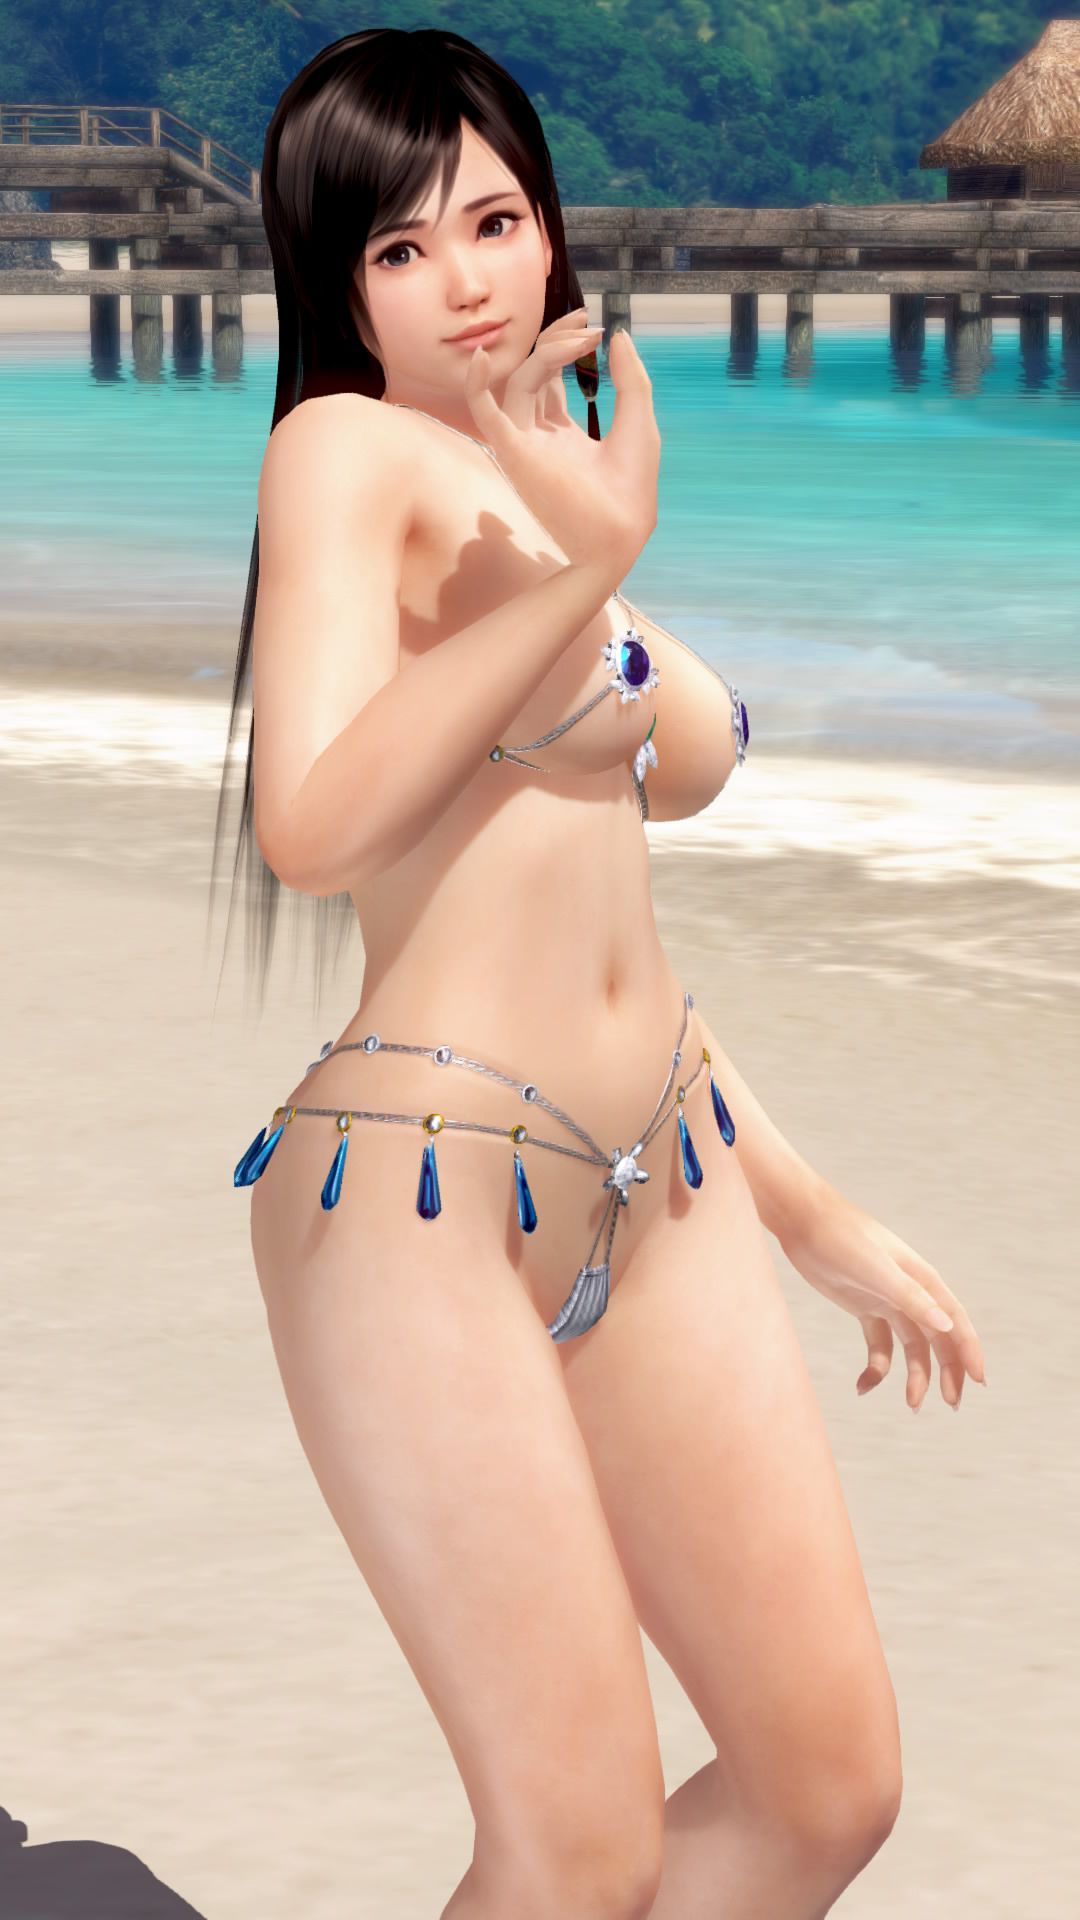 DOAX3 heart has a cute neat and clean system bitch 5